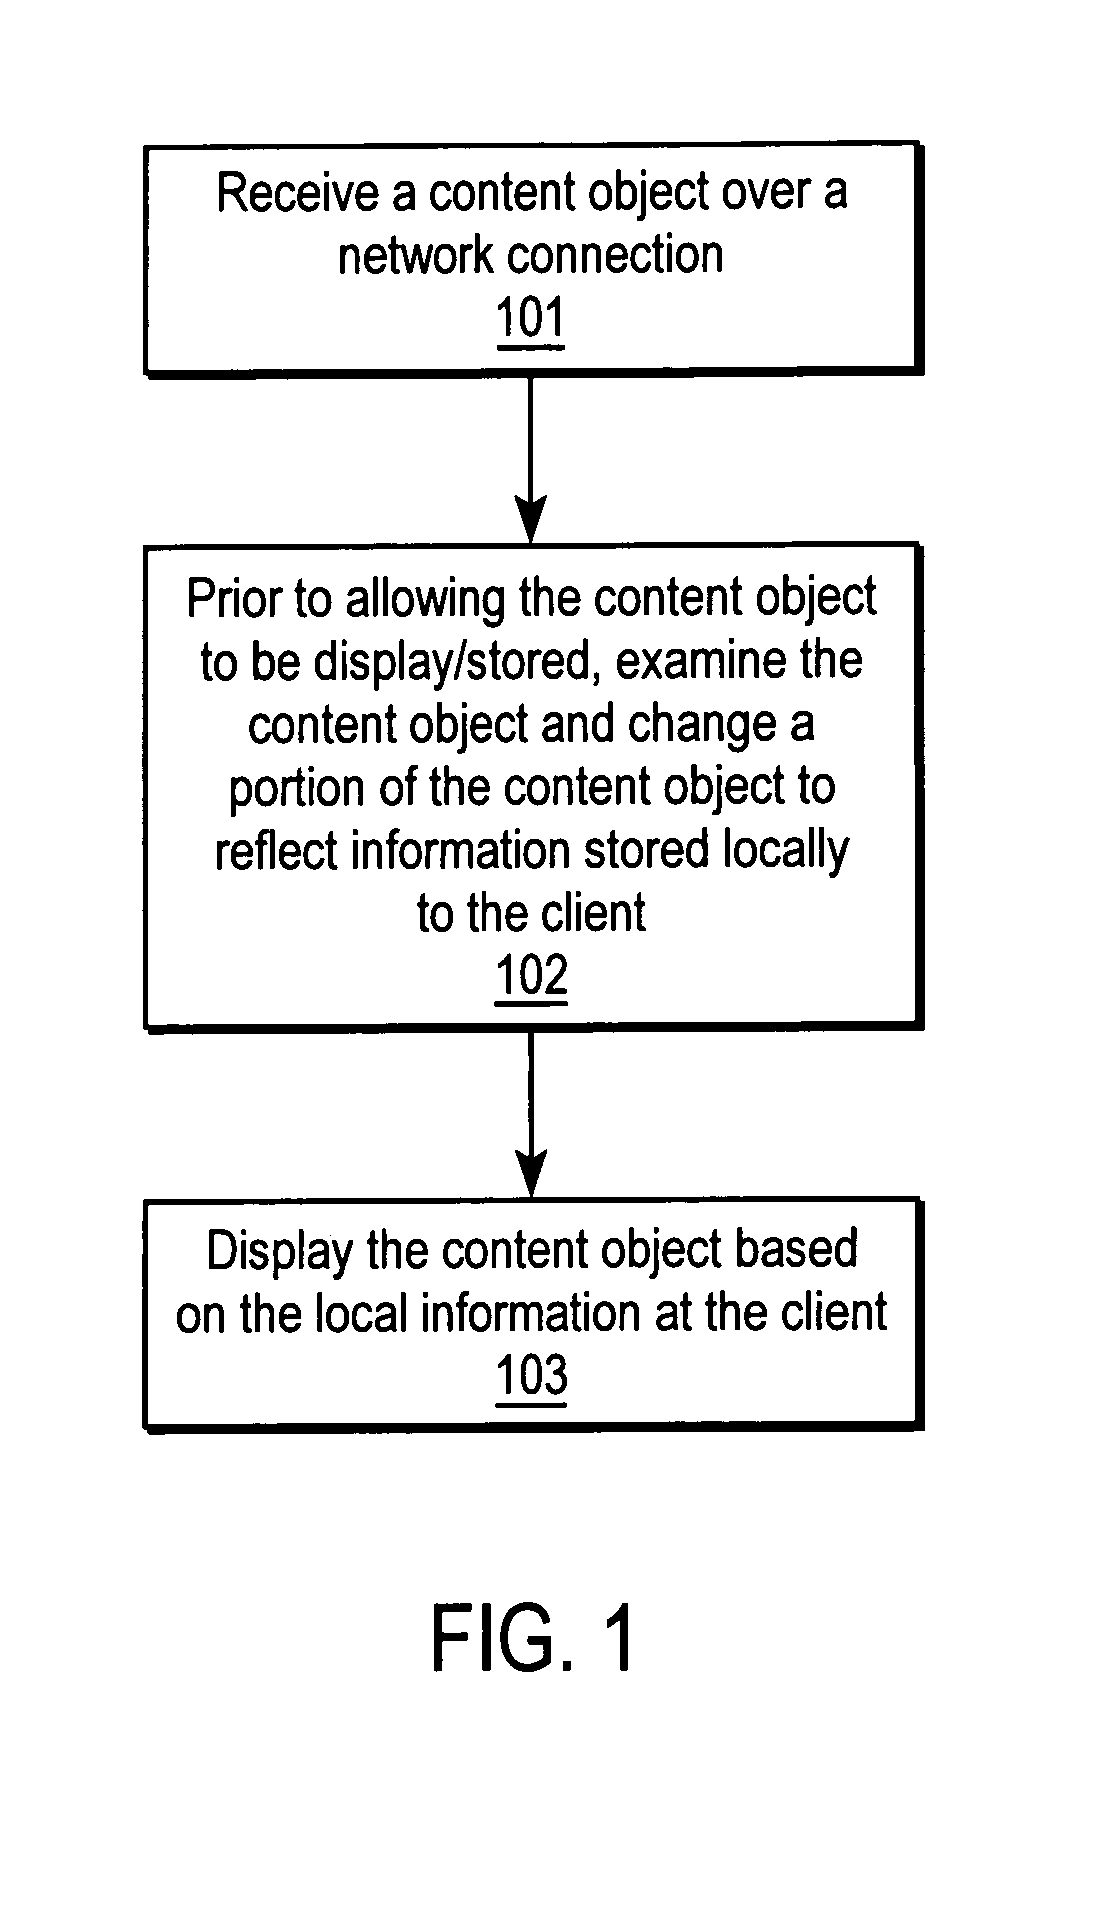 Manipulating content objects to control their display